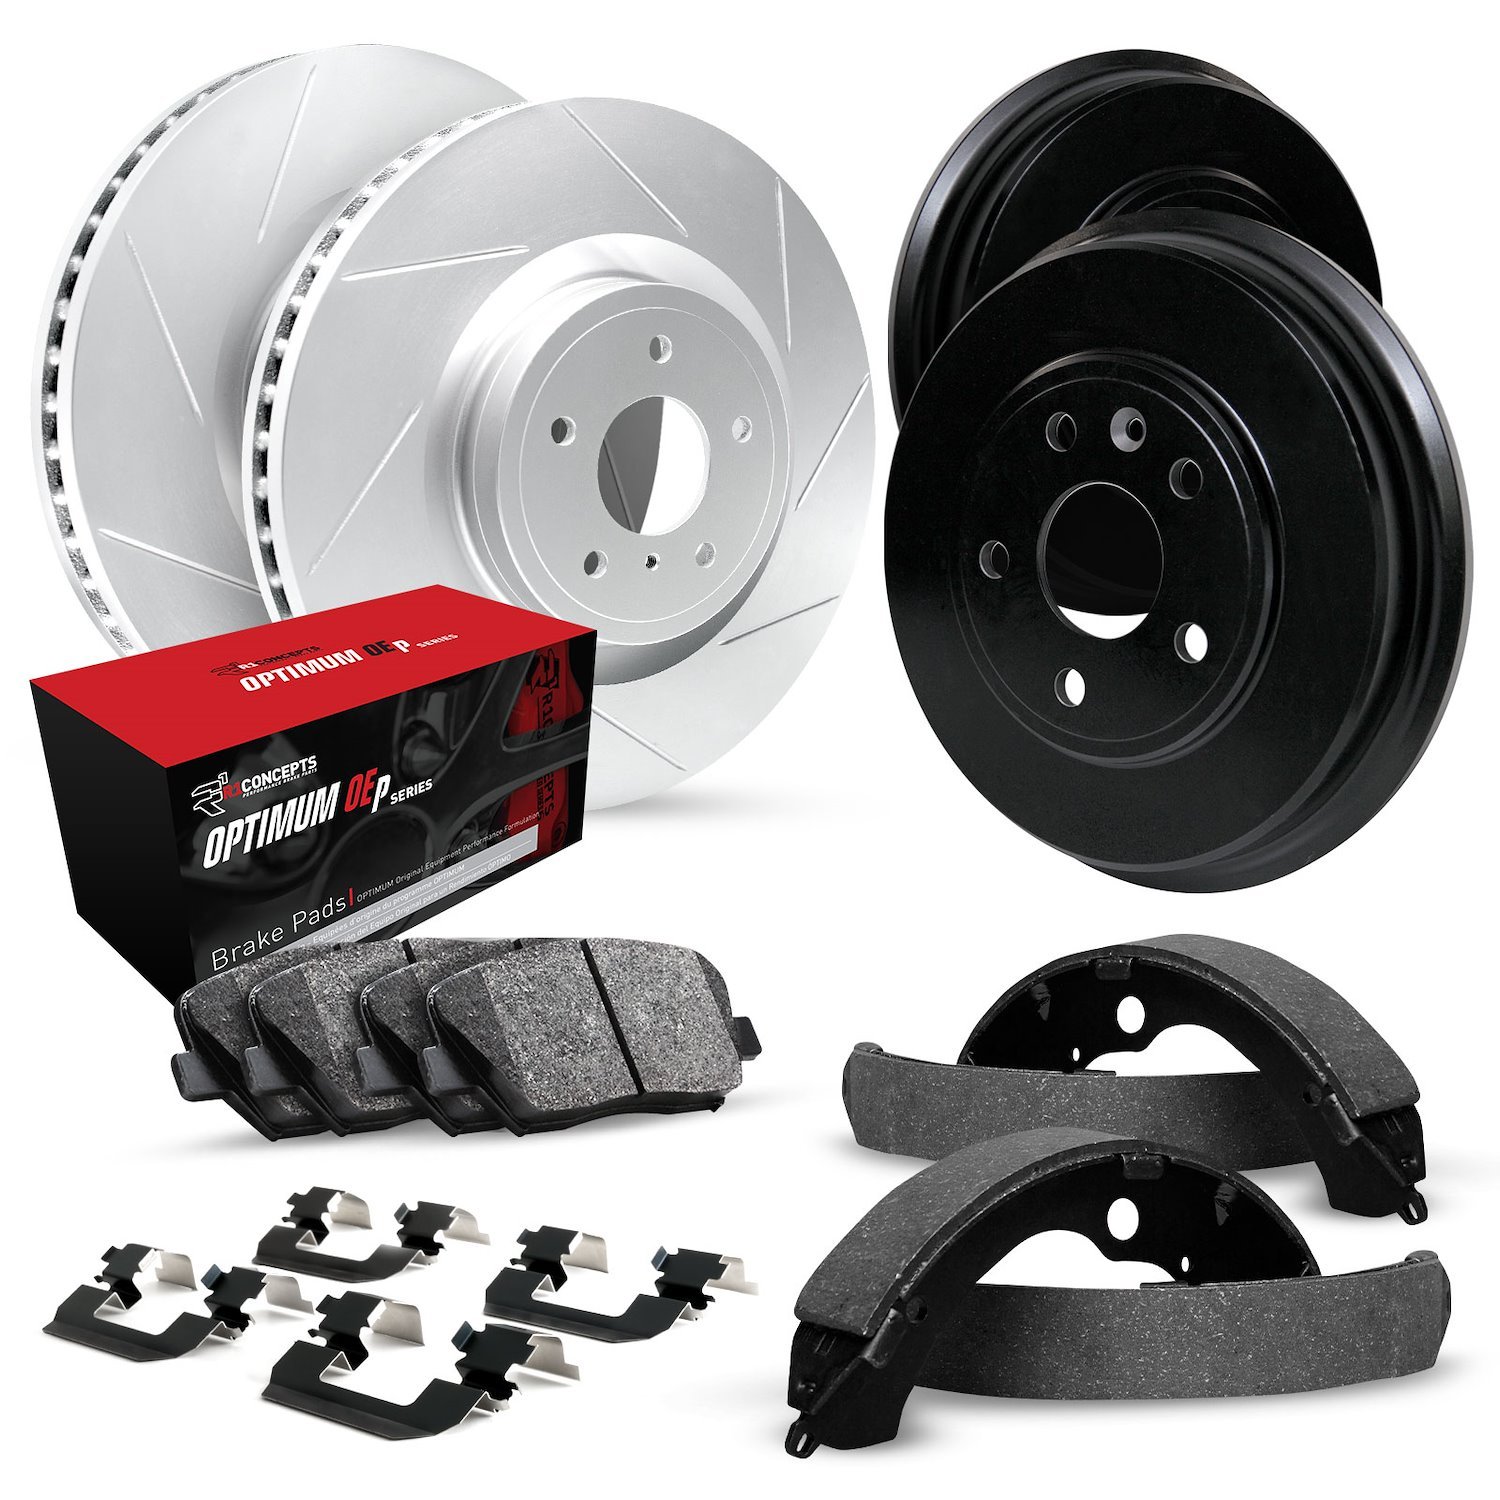 GEO-Carbon Slotted Brake Rotor & Drum Set w/Optimum OE Pads, Shoes, & Hardware, 1992-1996 GM, Position: Front & Rear